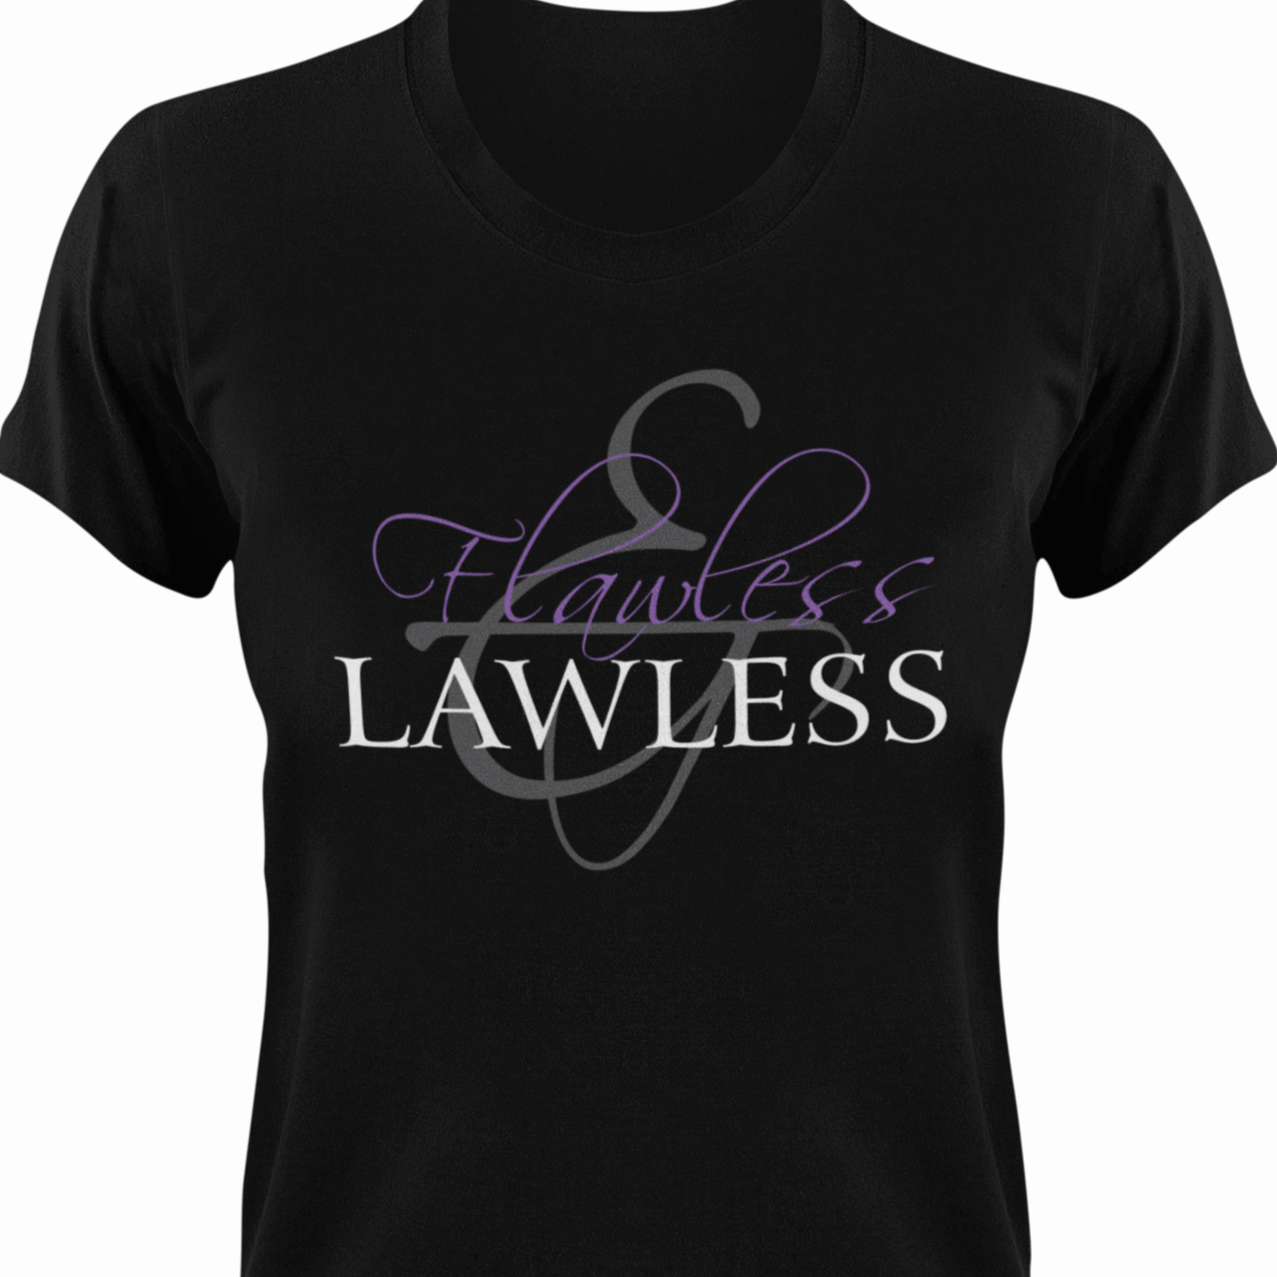 Flawless and Lawless